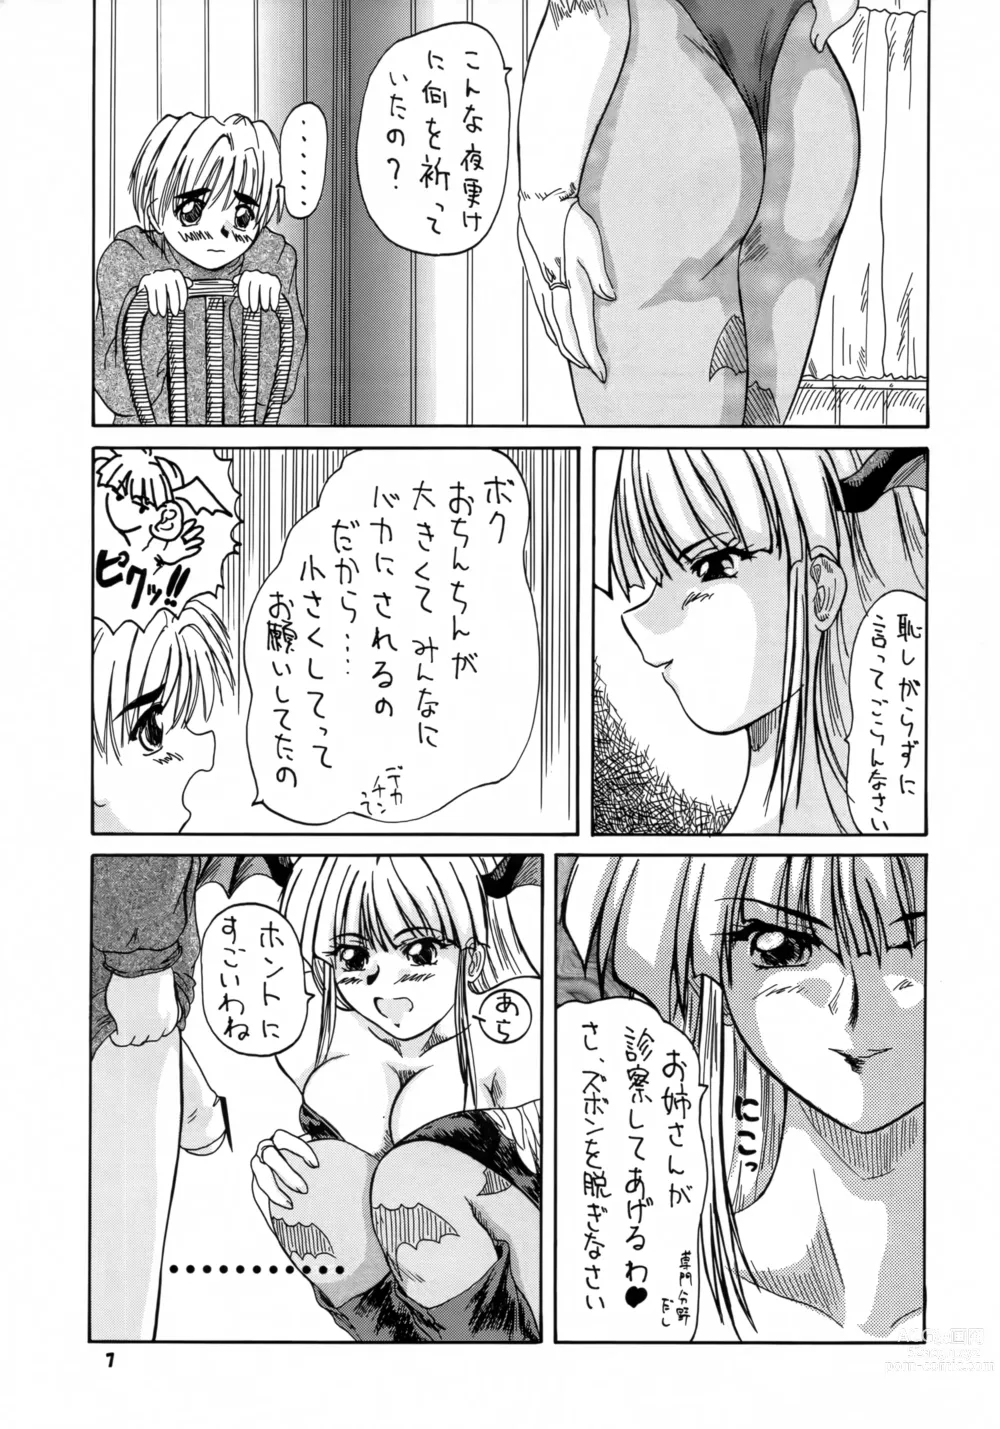 Page 6 of doujinshi 2STROKE TZR